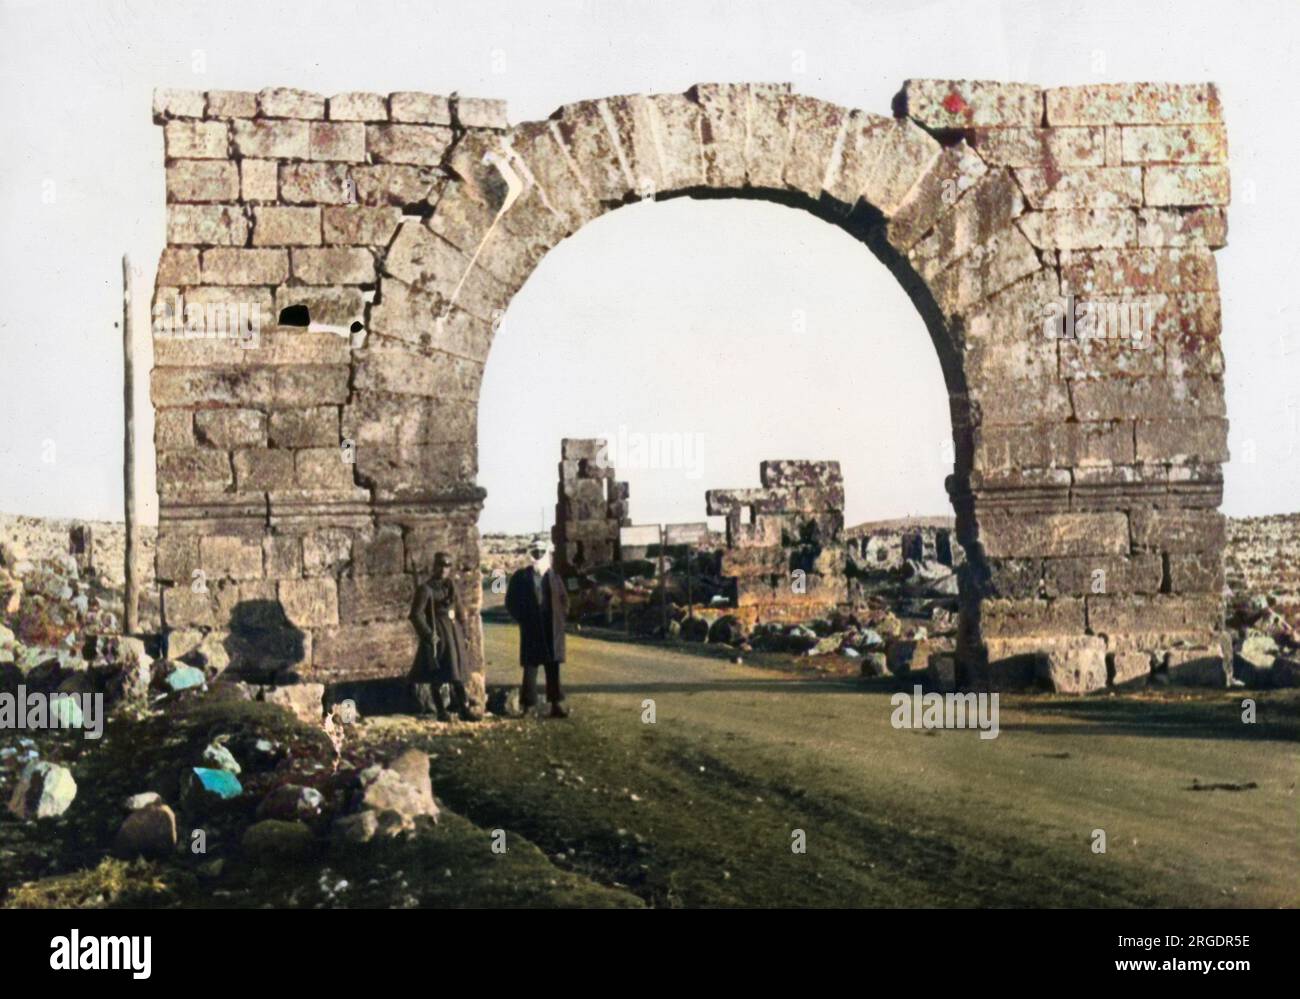 The Guard on the Roman Arch. Between Aleppo and Homs, Syria, this well-preserved stone arch stands in a field of ruins. Stock Photo